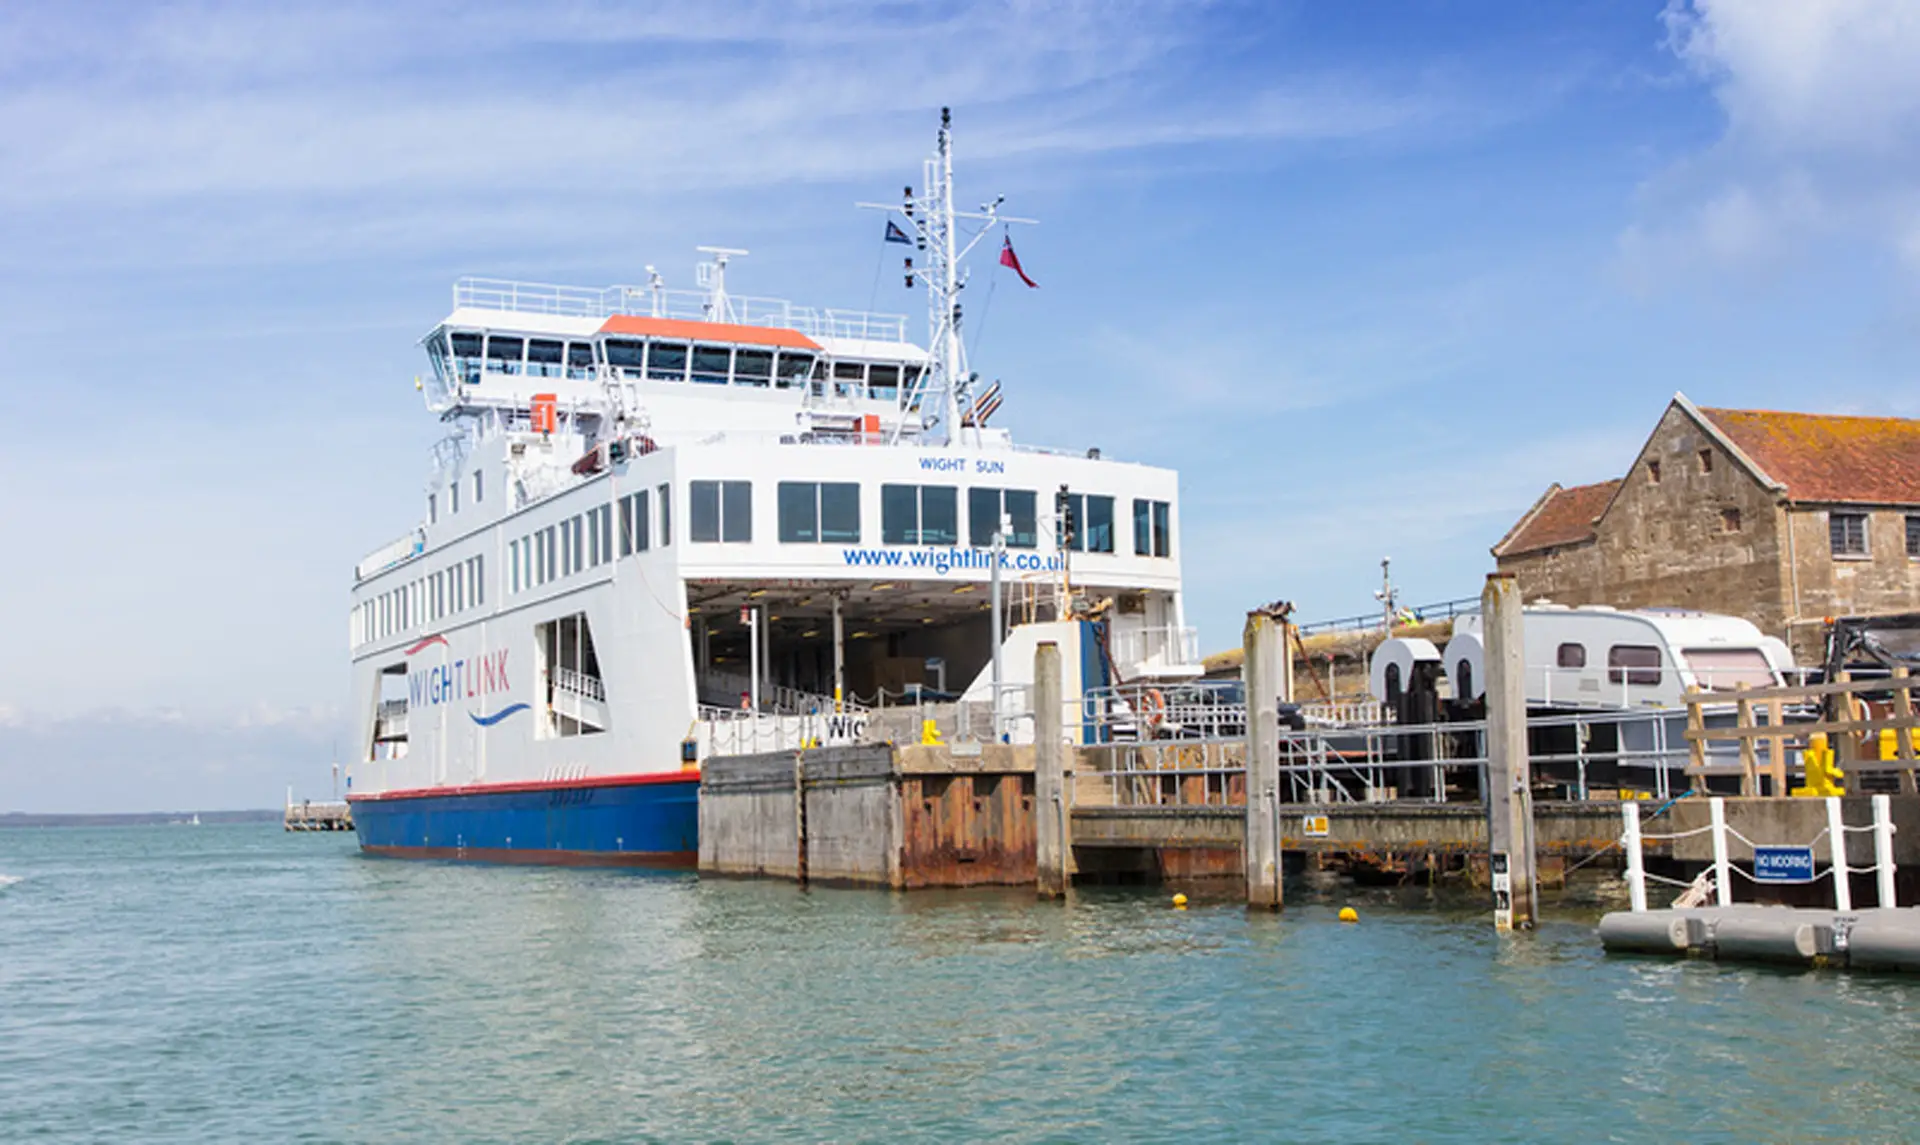 Wight Sun ferry at Yarmouth